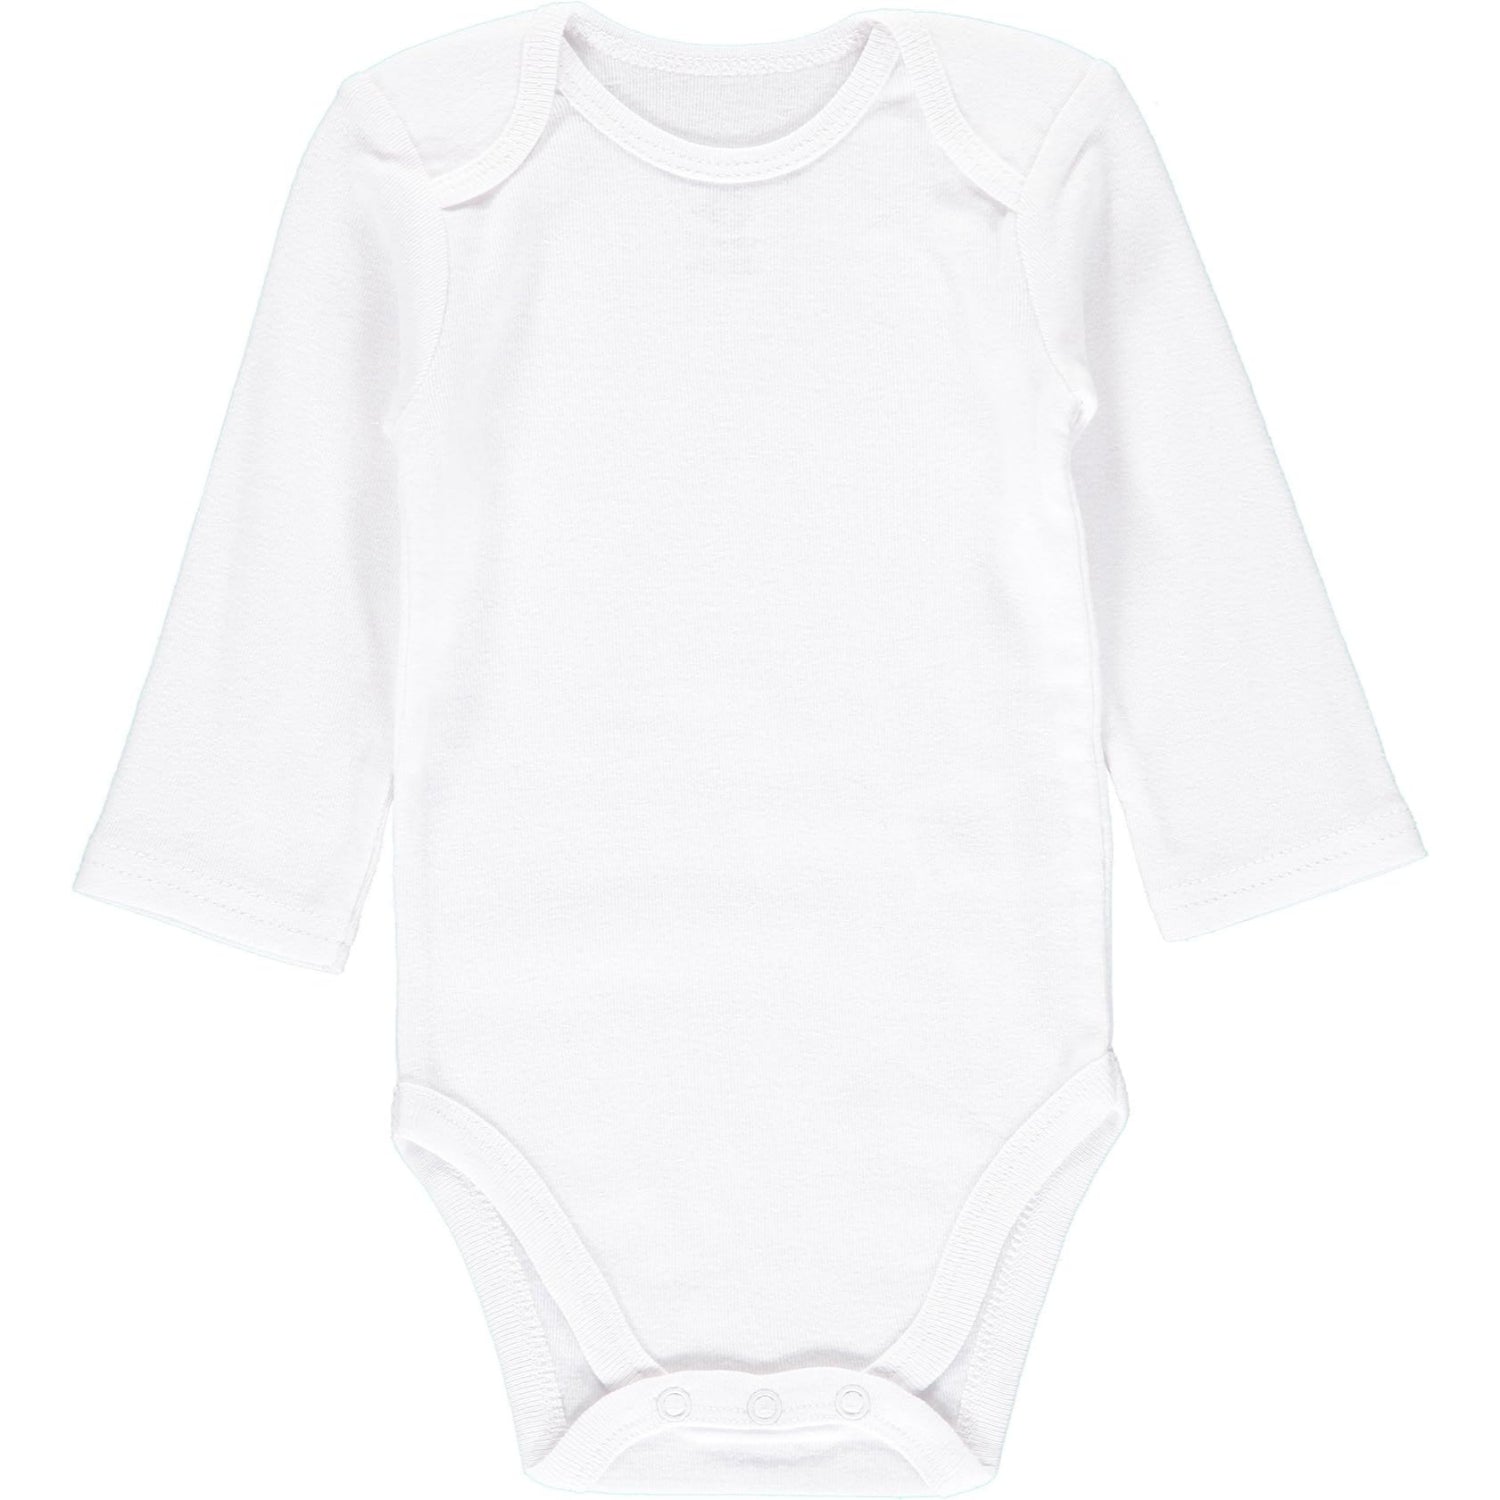 Wan-A-Beez Baby Boy and Baby Girls 0-24 Months 4-Pack Long Sleeve Bodysuits